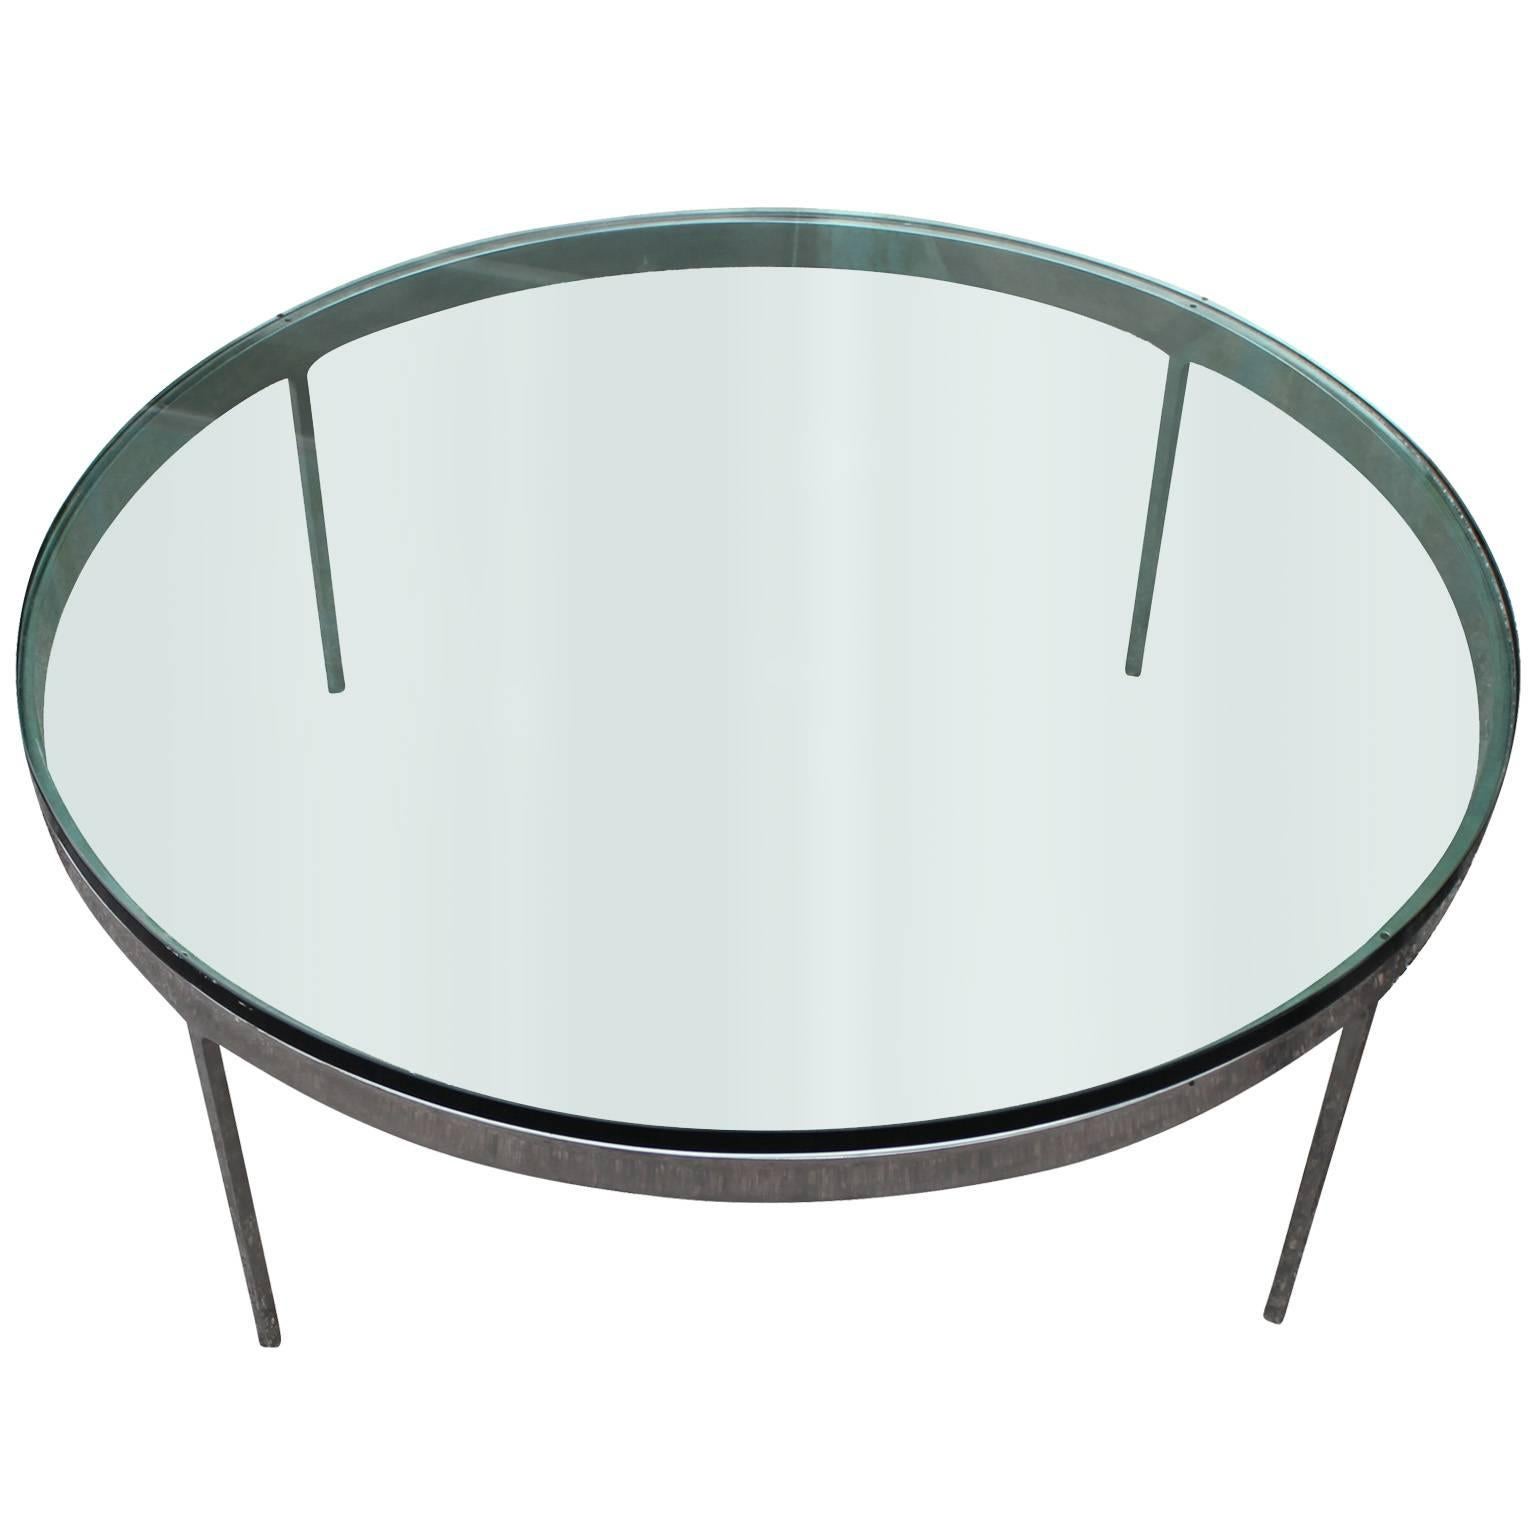 Iconic round coffee table by Nicos Zographos. Elegant stainless steel base is topped with thick cut-glass.